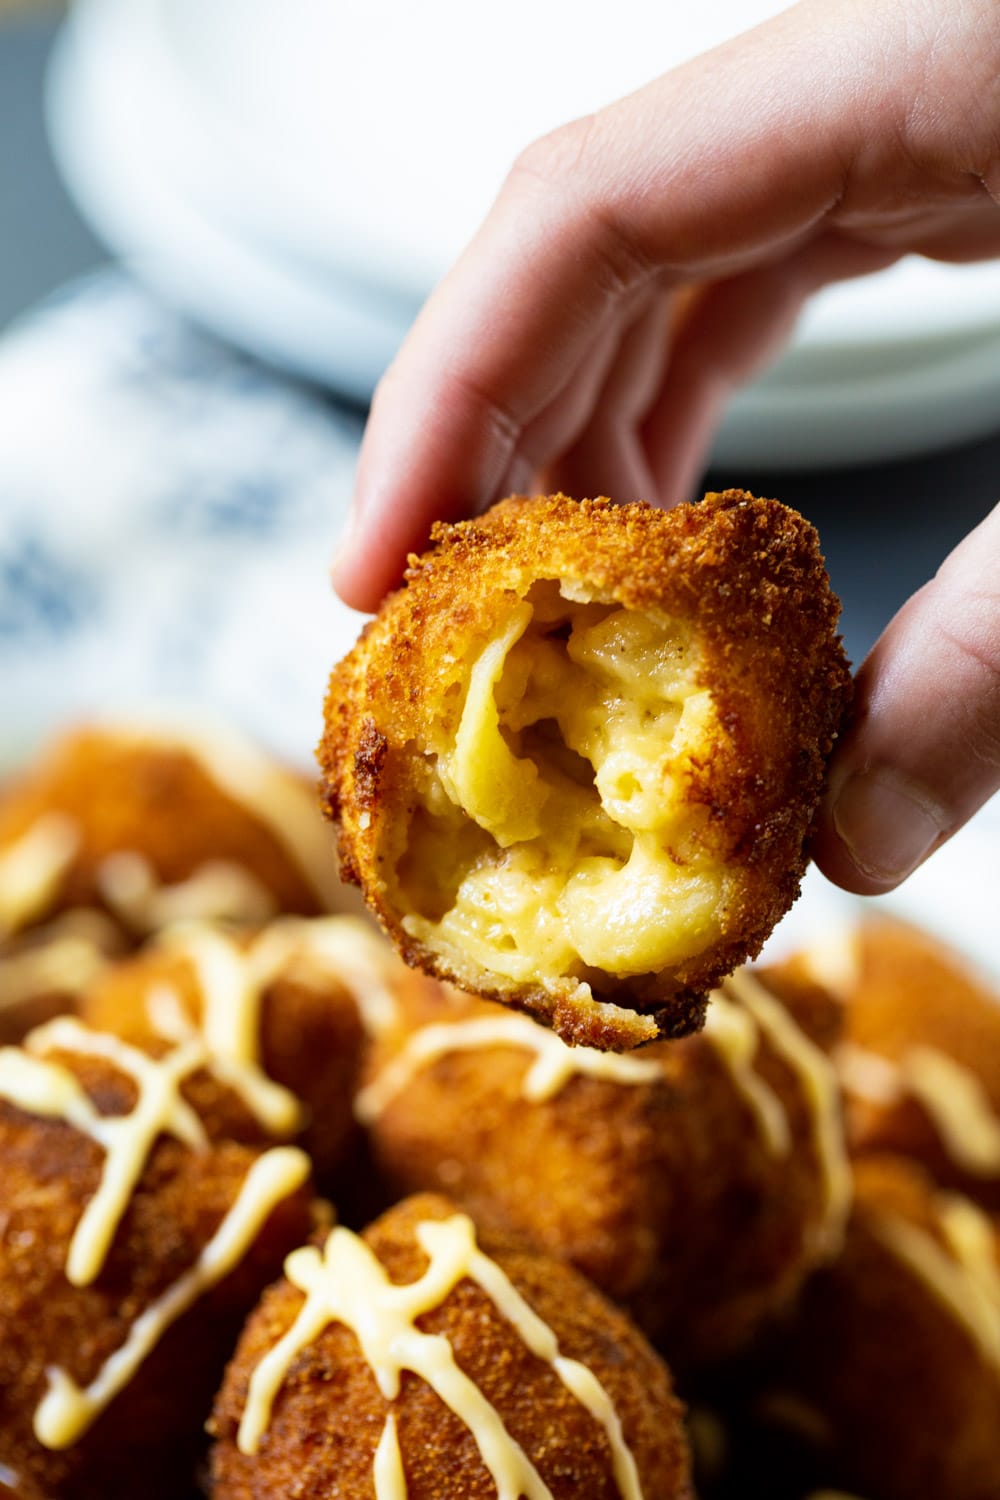 Fried Mac and Cheese with a bite removed to show inside.